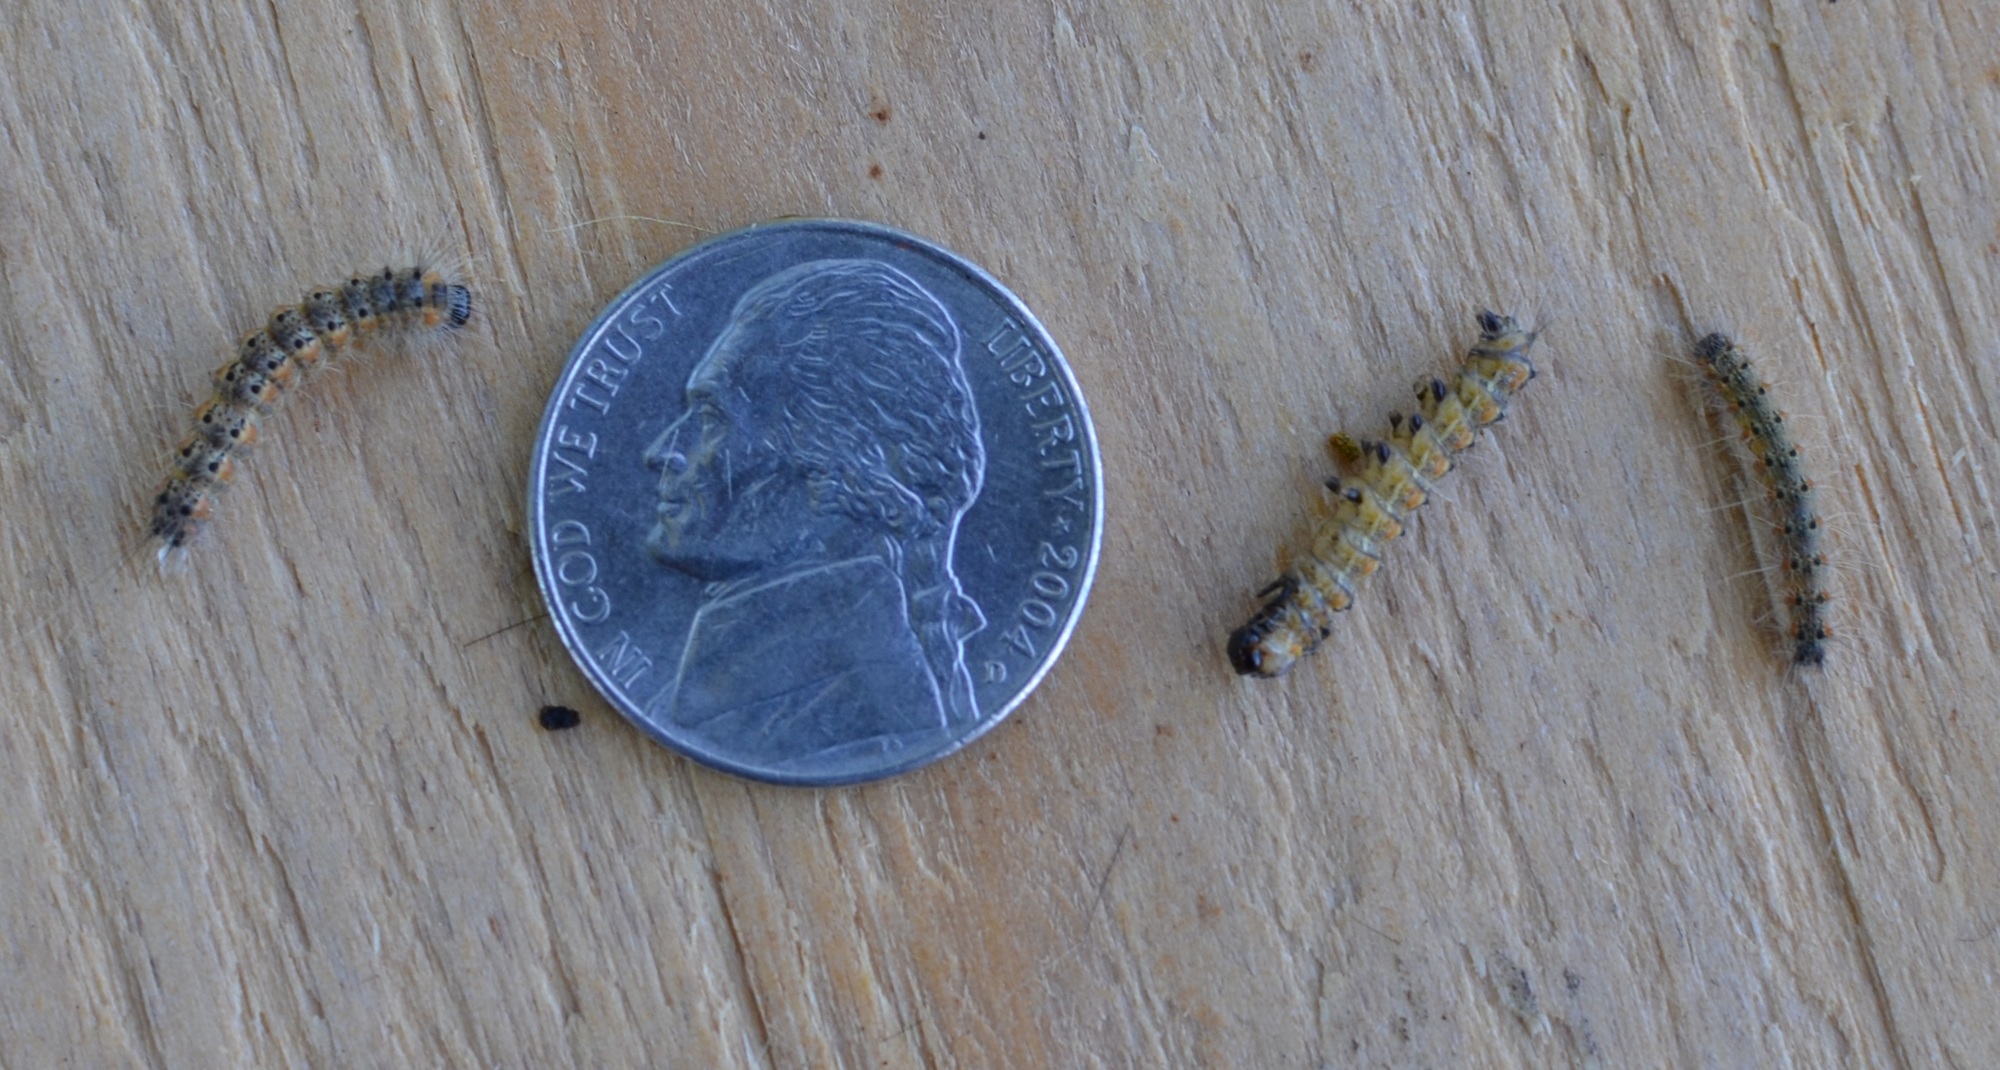 Fall webworms are native species to Michigan. An outbreak of the worms has been reported in several parts of the Upper Peninsula this year.